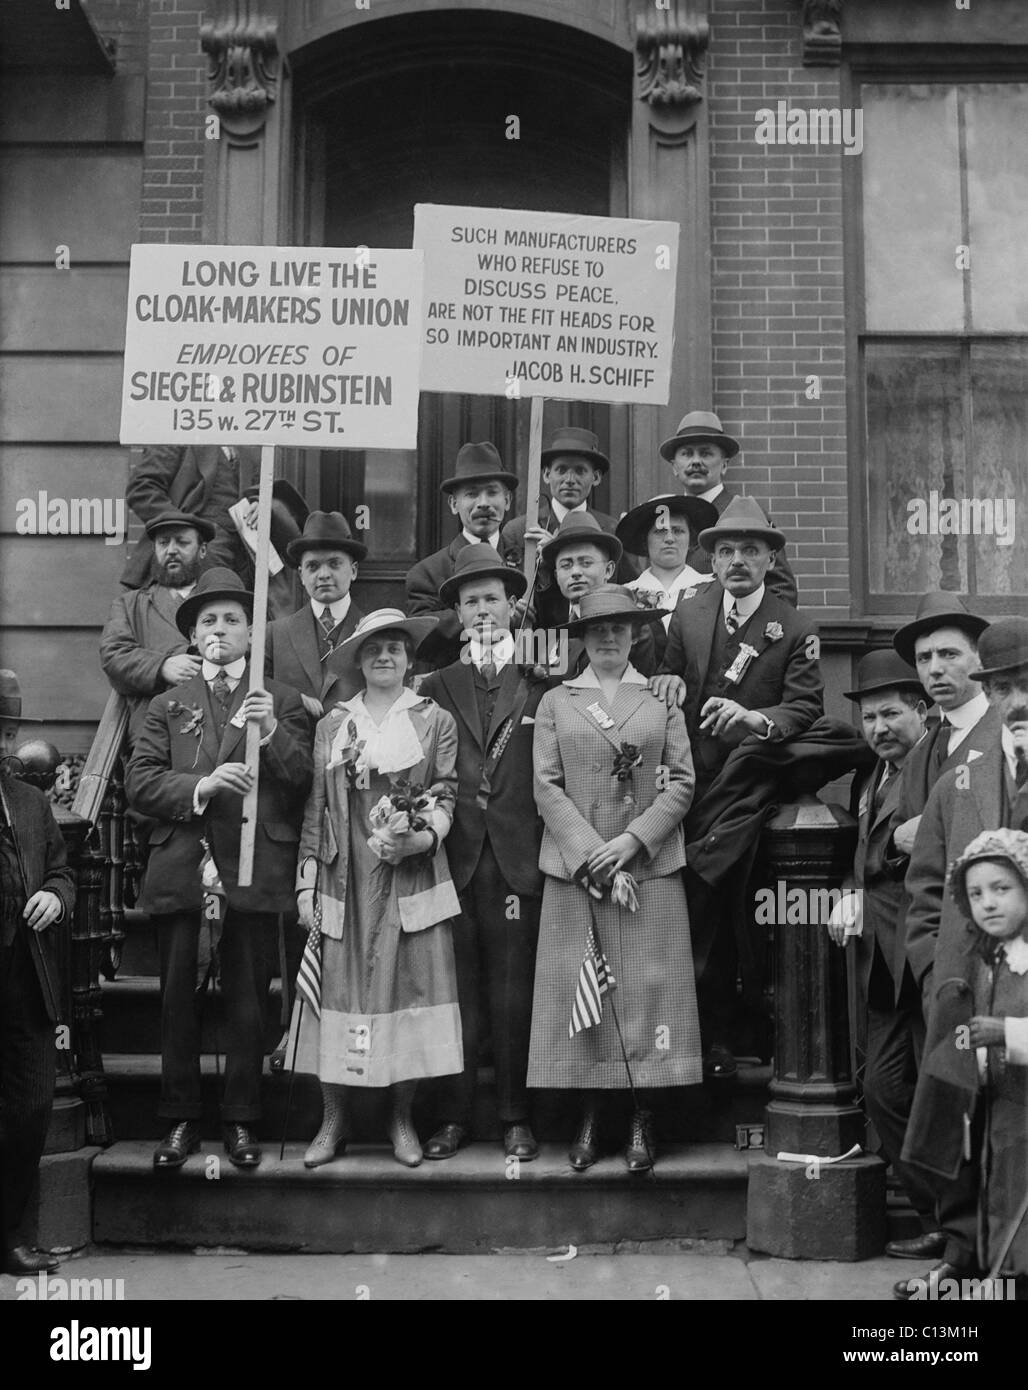 On May Day, striking cloak makers display a sign reading, SUCH MANUFACTURERS WHO REFUSE TO DISCUSS PEACE ARE NOT FIT HEADS FOR SO IMPORTANT AN INDUSTRY. New York City, May 1, 1916. Stock Photo